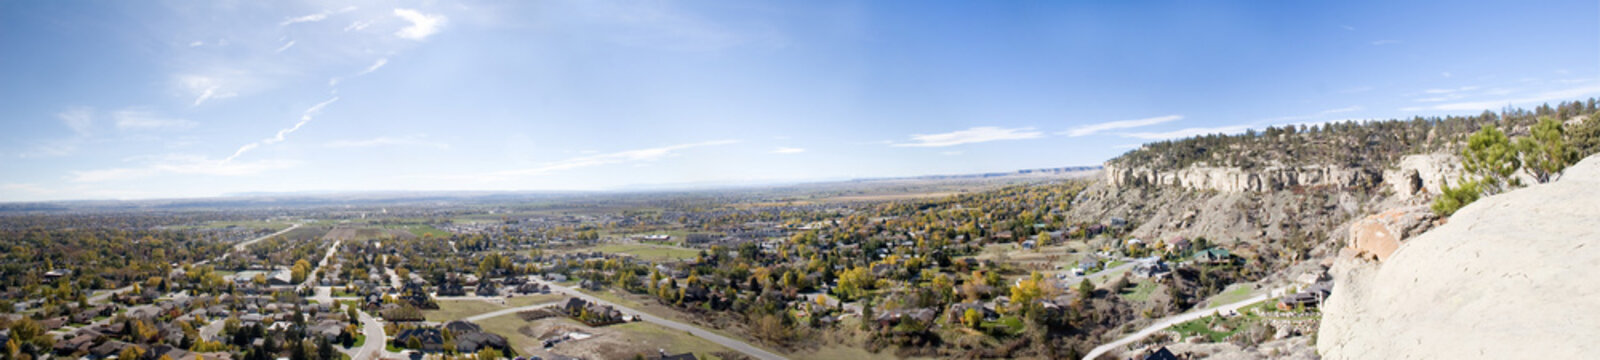 West end of Billings, Montana. Billings is know as the Magic City.